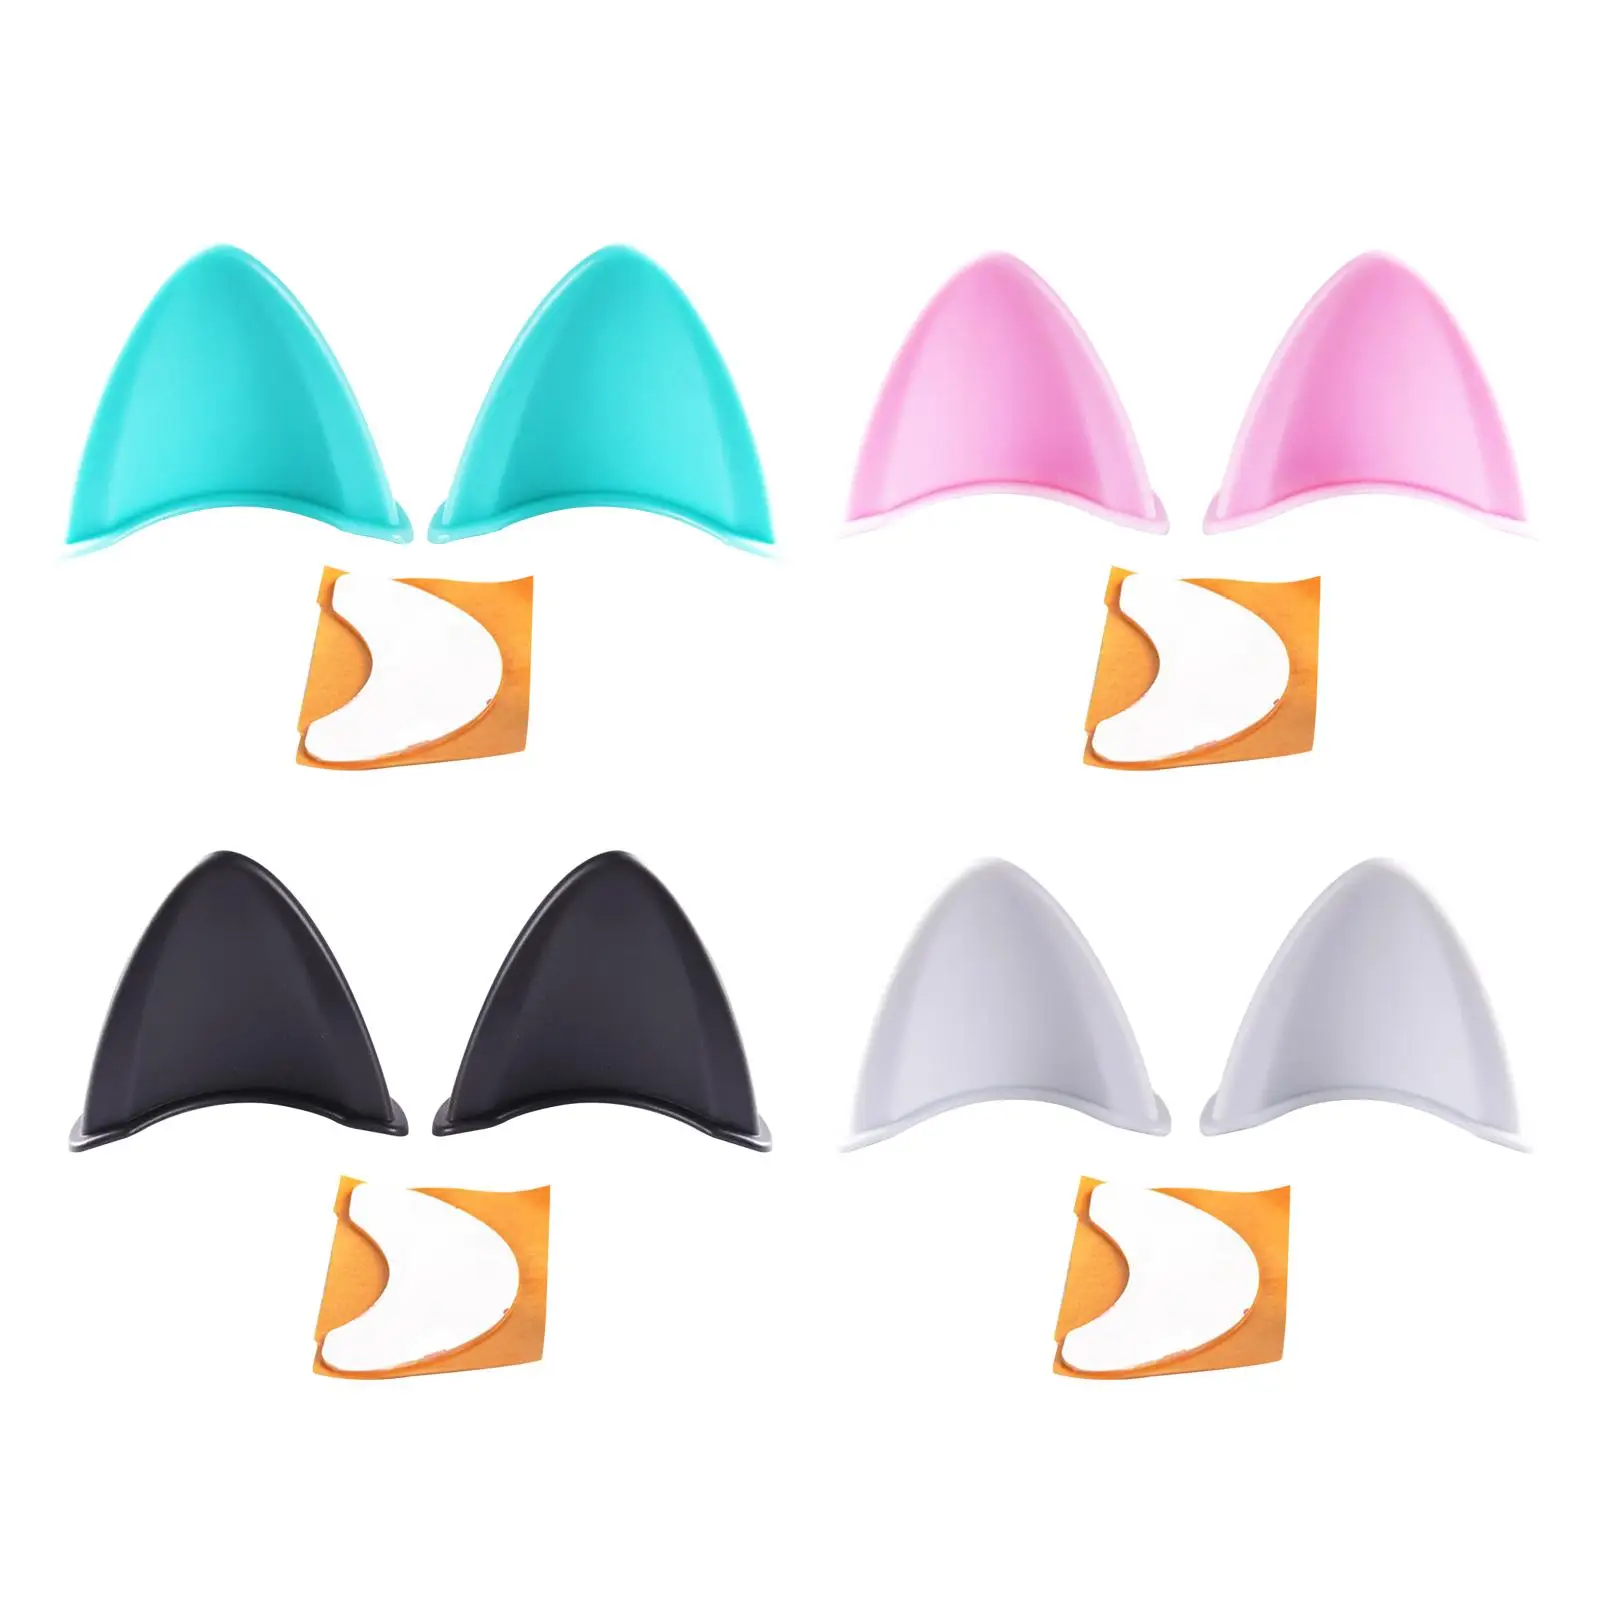 Helmet Cat Ears Accessory Interchangeable Adhesive Decoration for Motorcycle Helmets Bike Ski Scooter (Helmet Not Included)